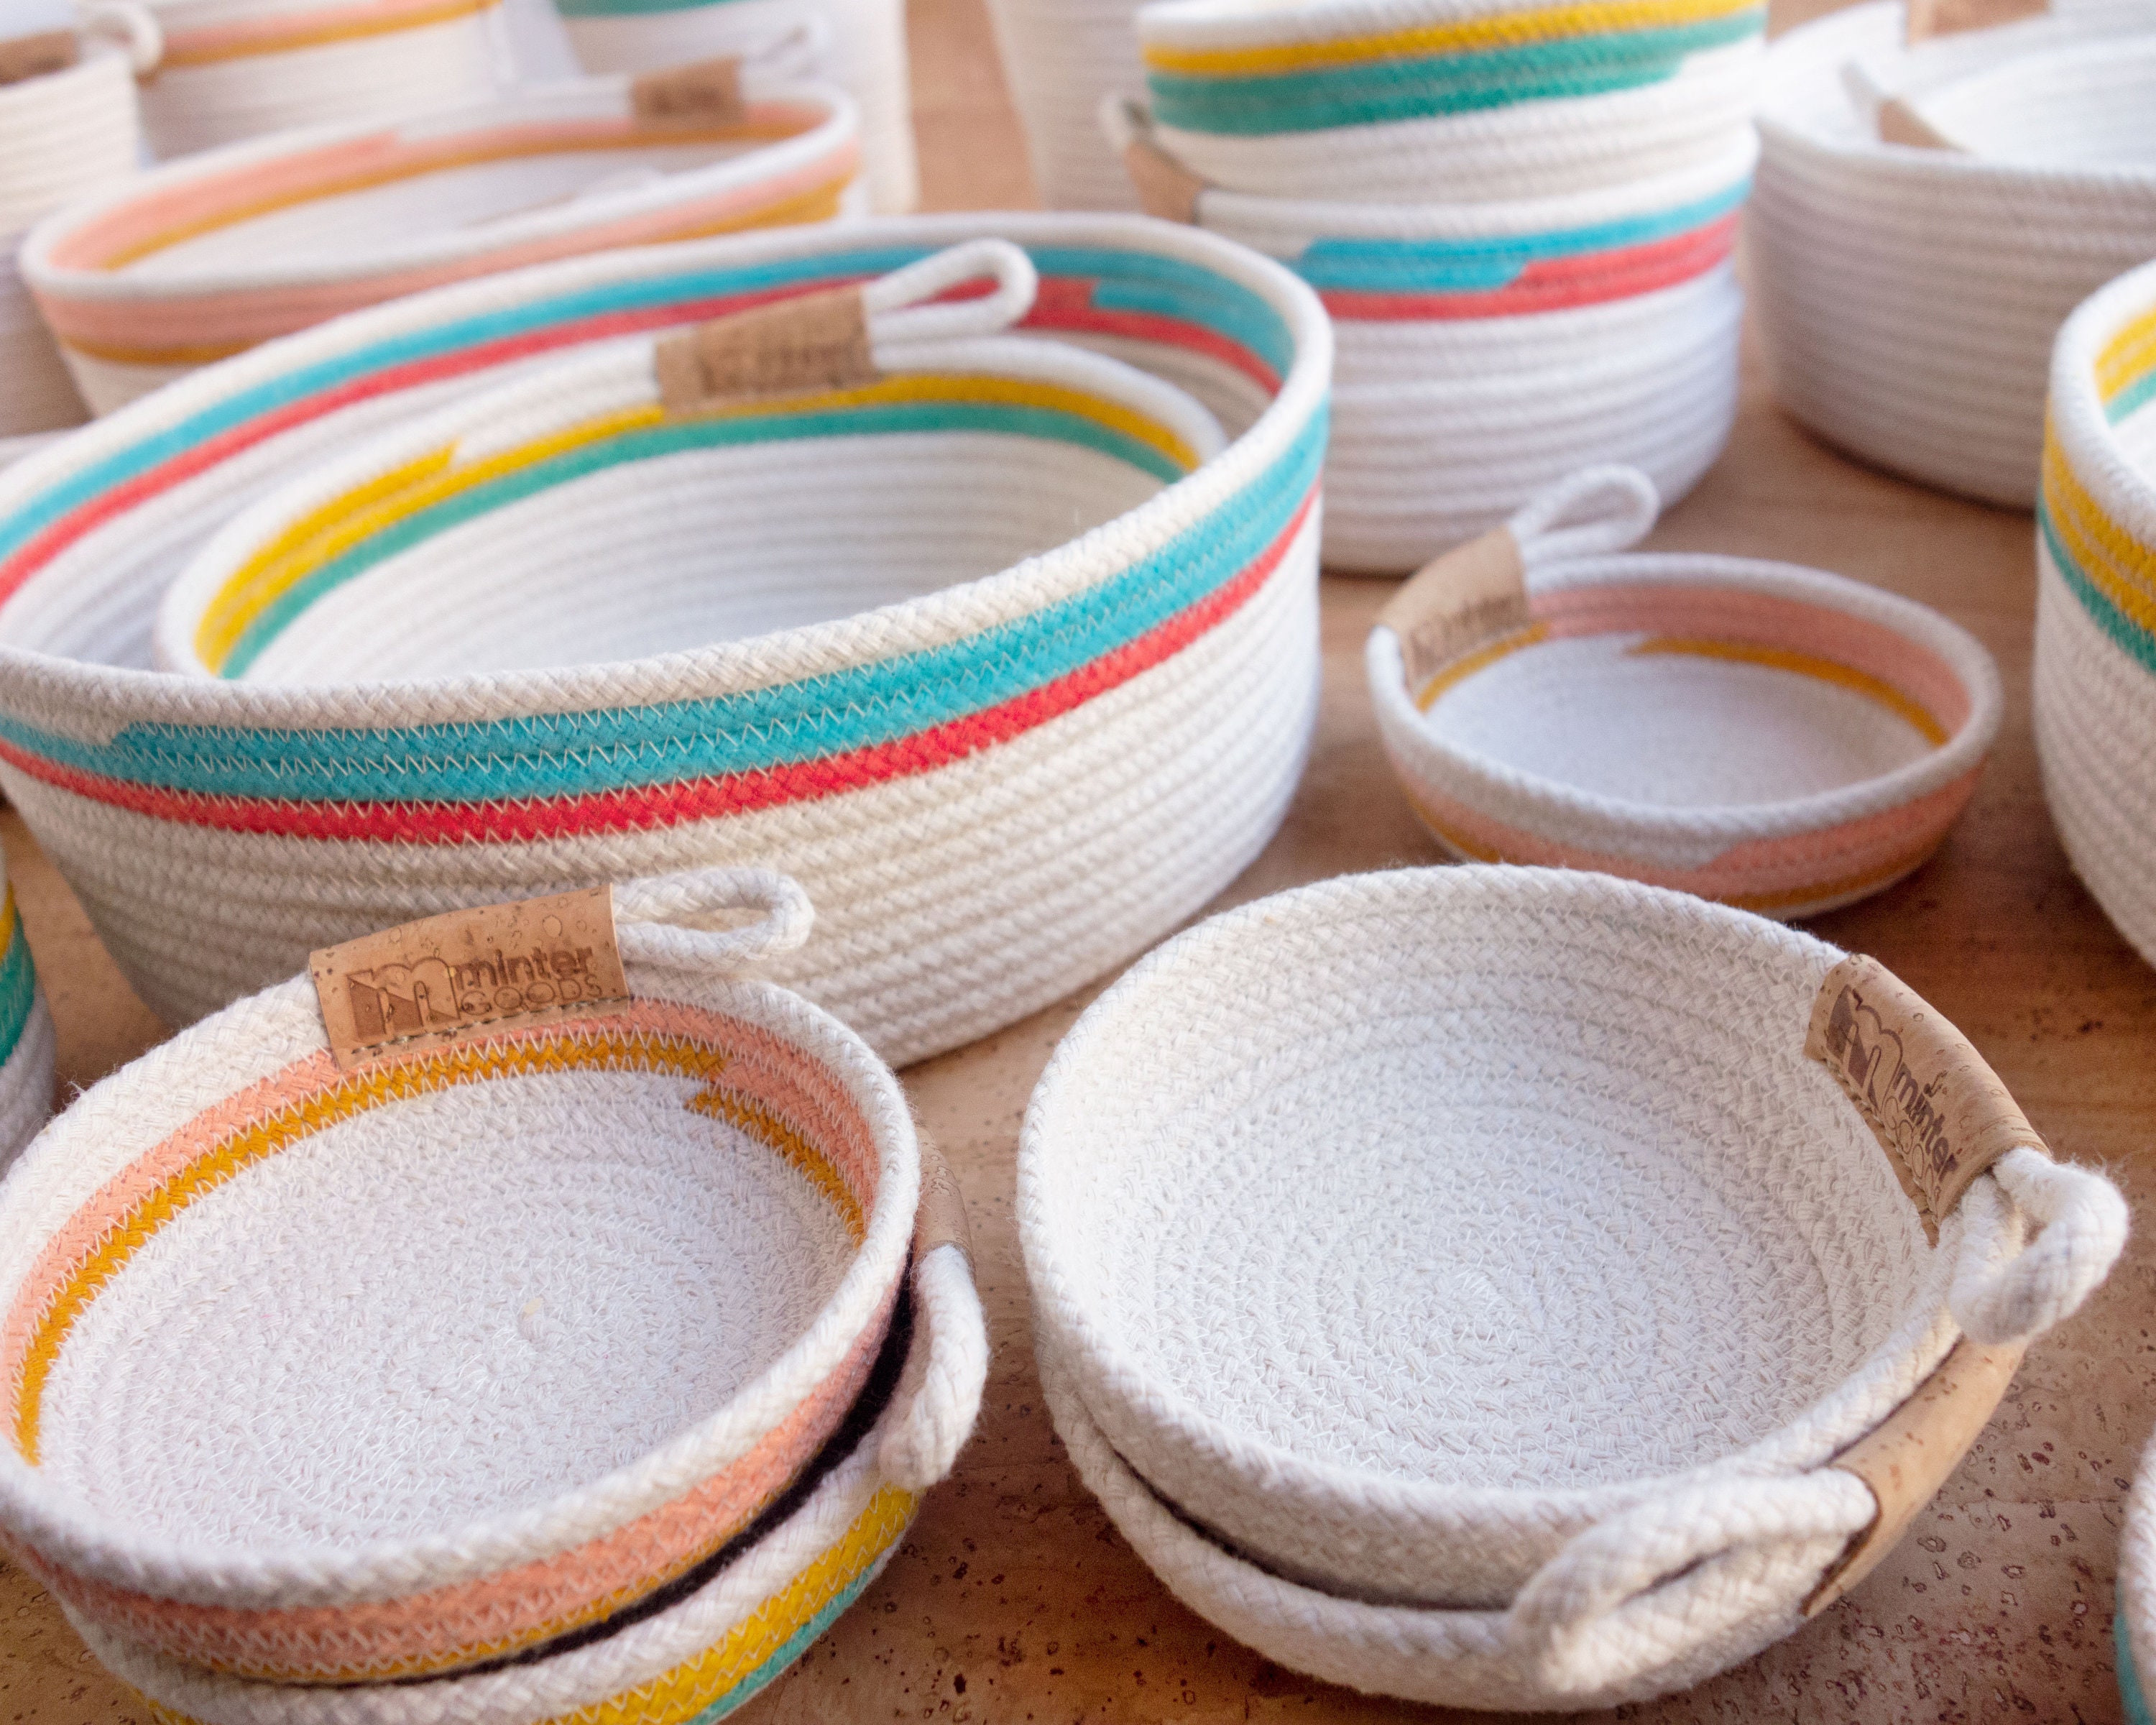 Rope Bowls, Various Sizes. Storage Bowls Made of Cotton